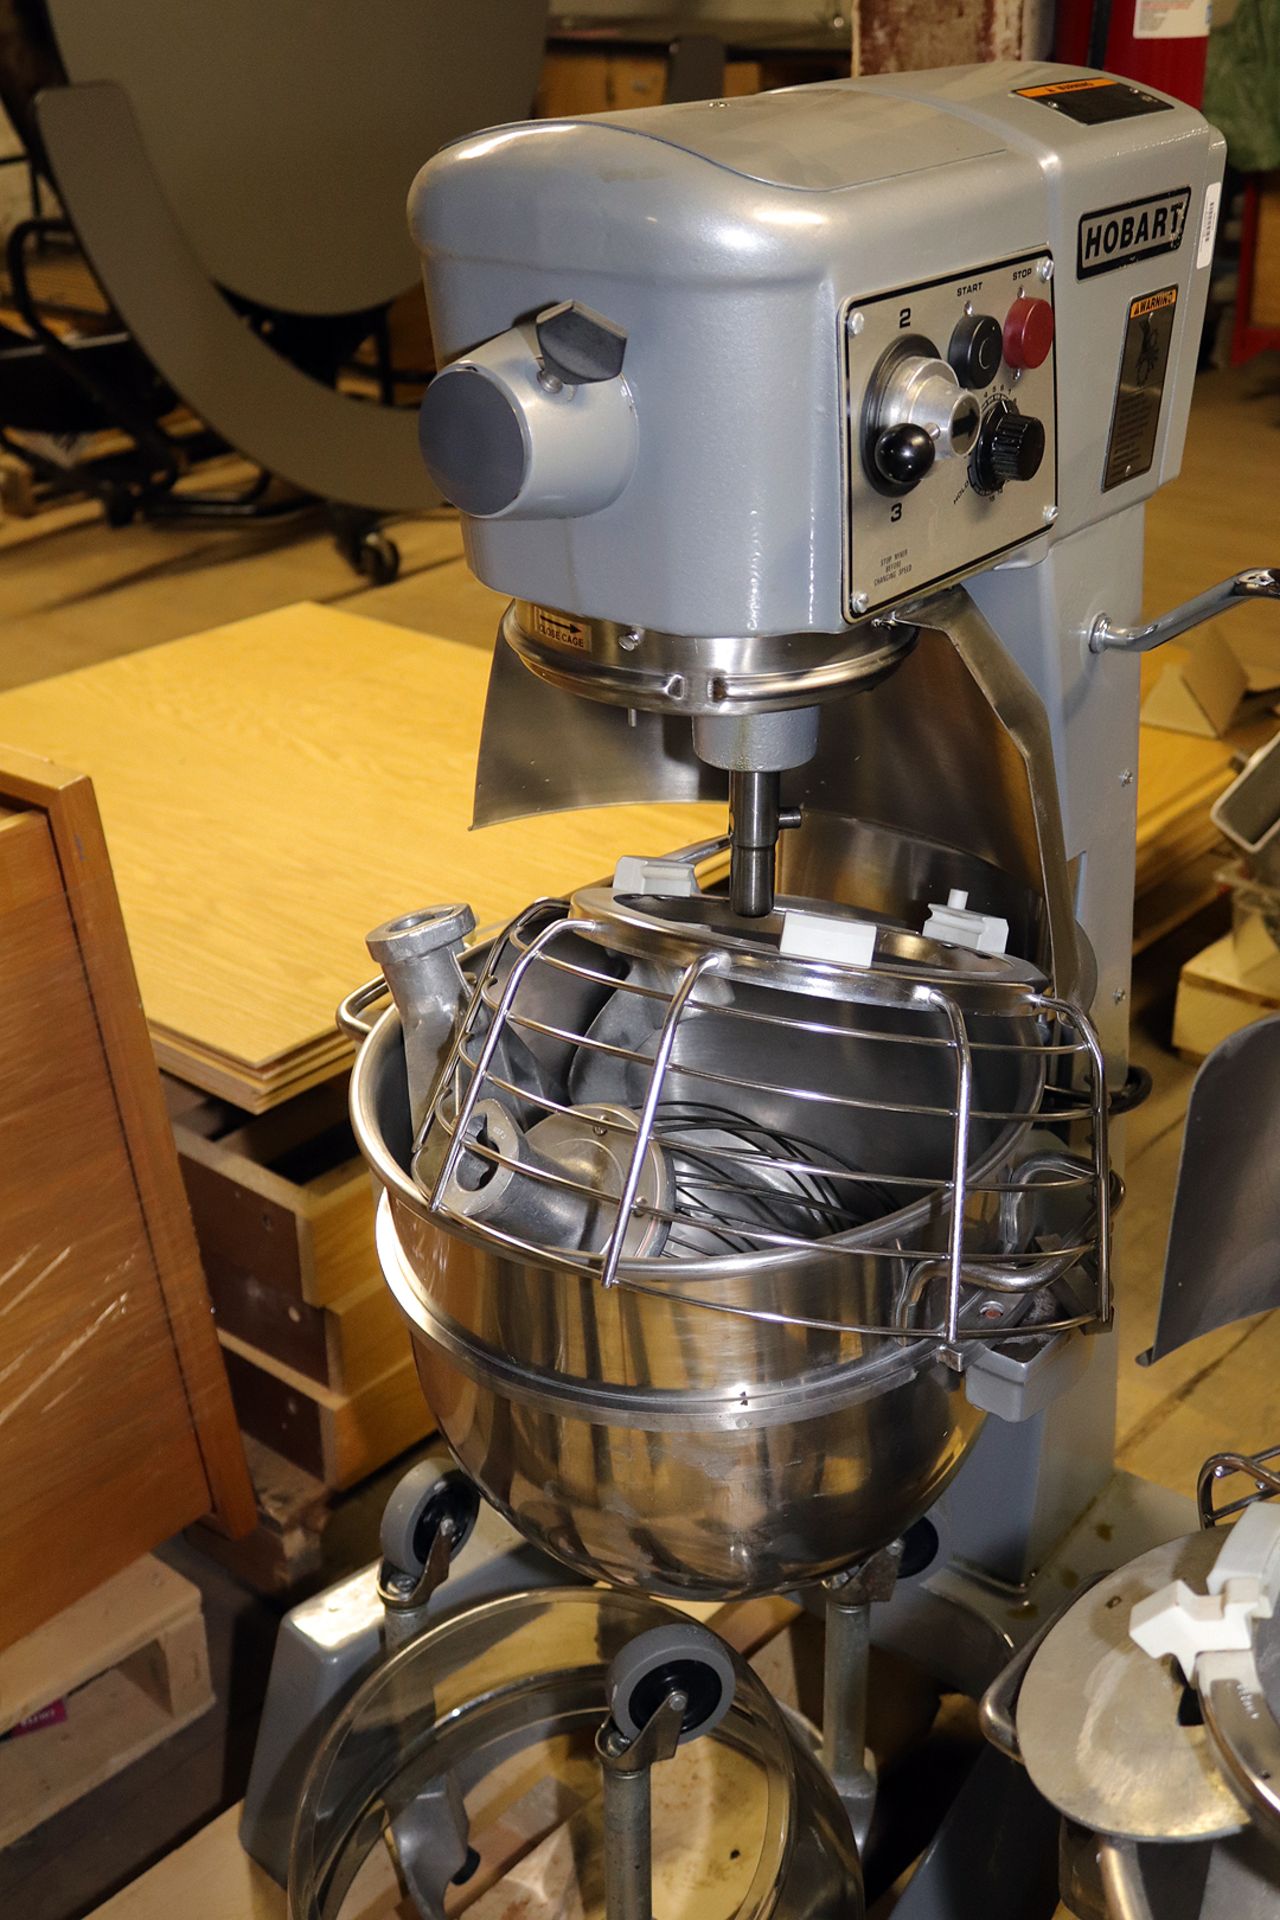 Hobart Commercial Mixer Model D300 with bowl and attachments